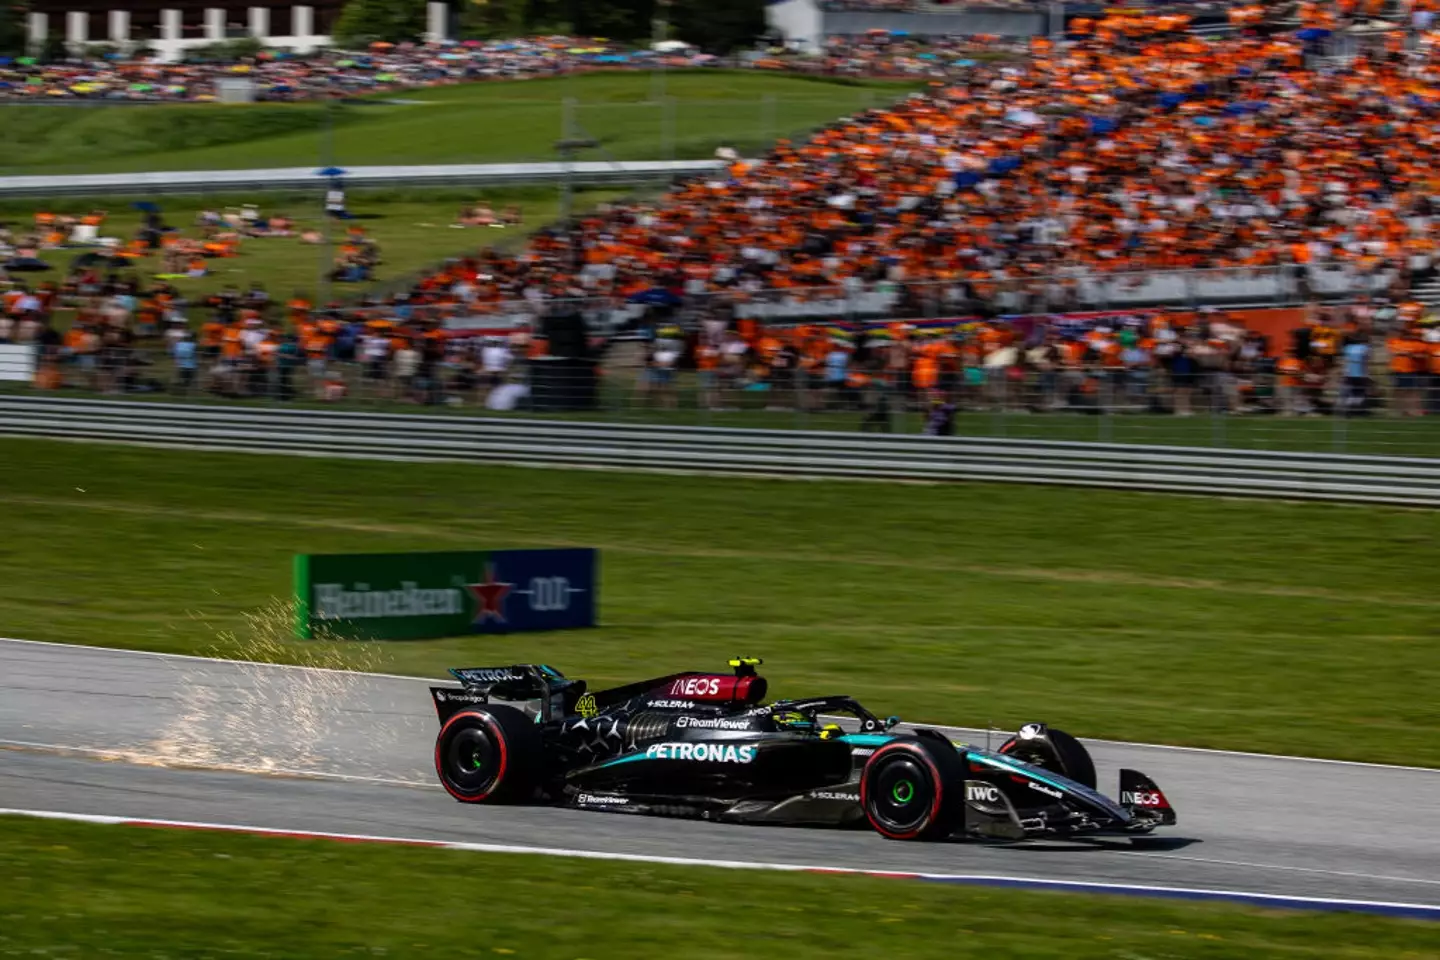 Lewis Hamilton will start in fifth for Sunday's Austrian Grand Prix. (Image: Getty)